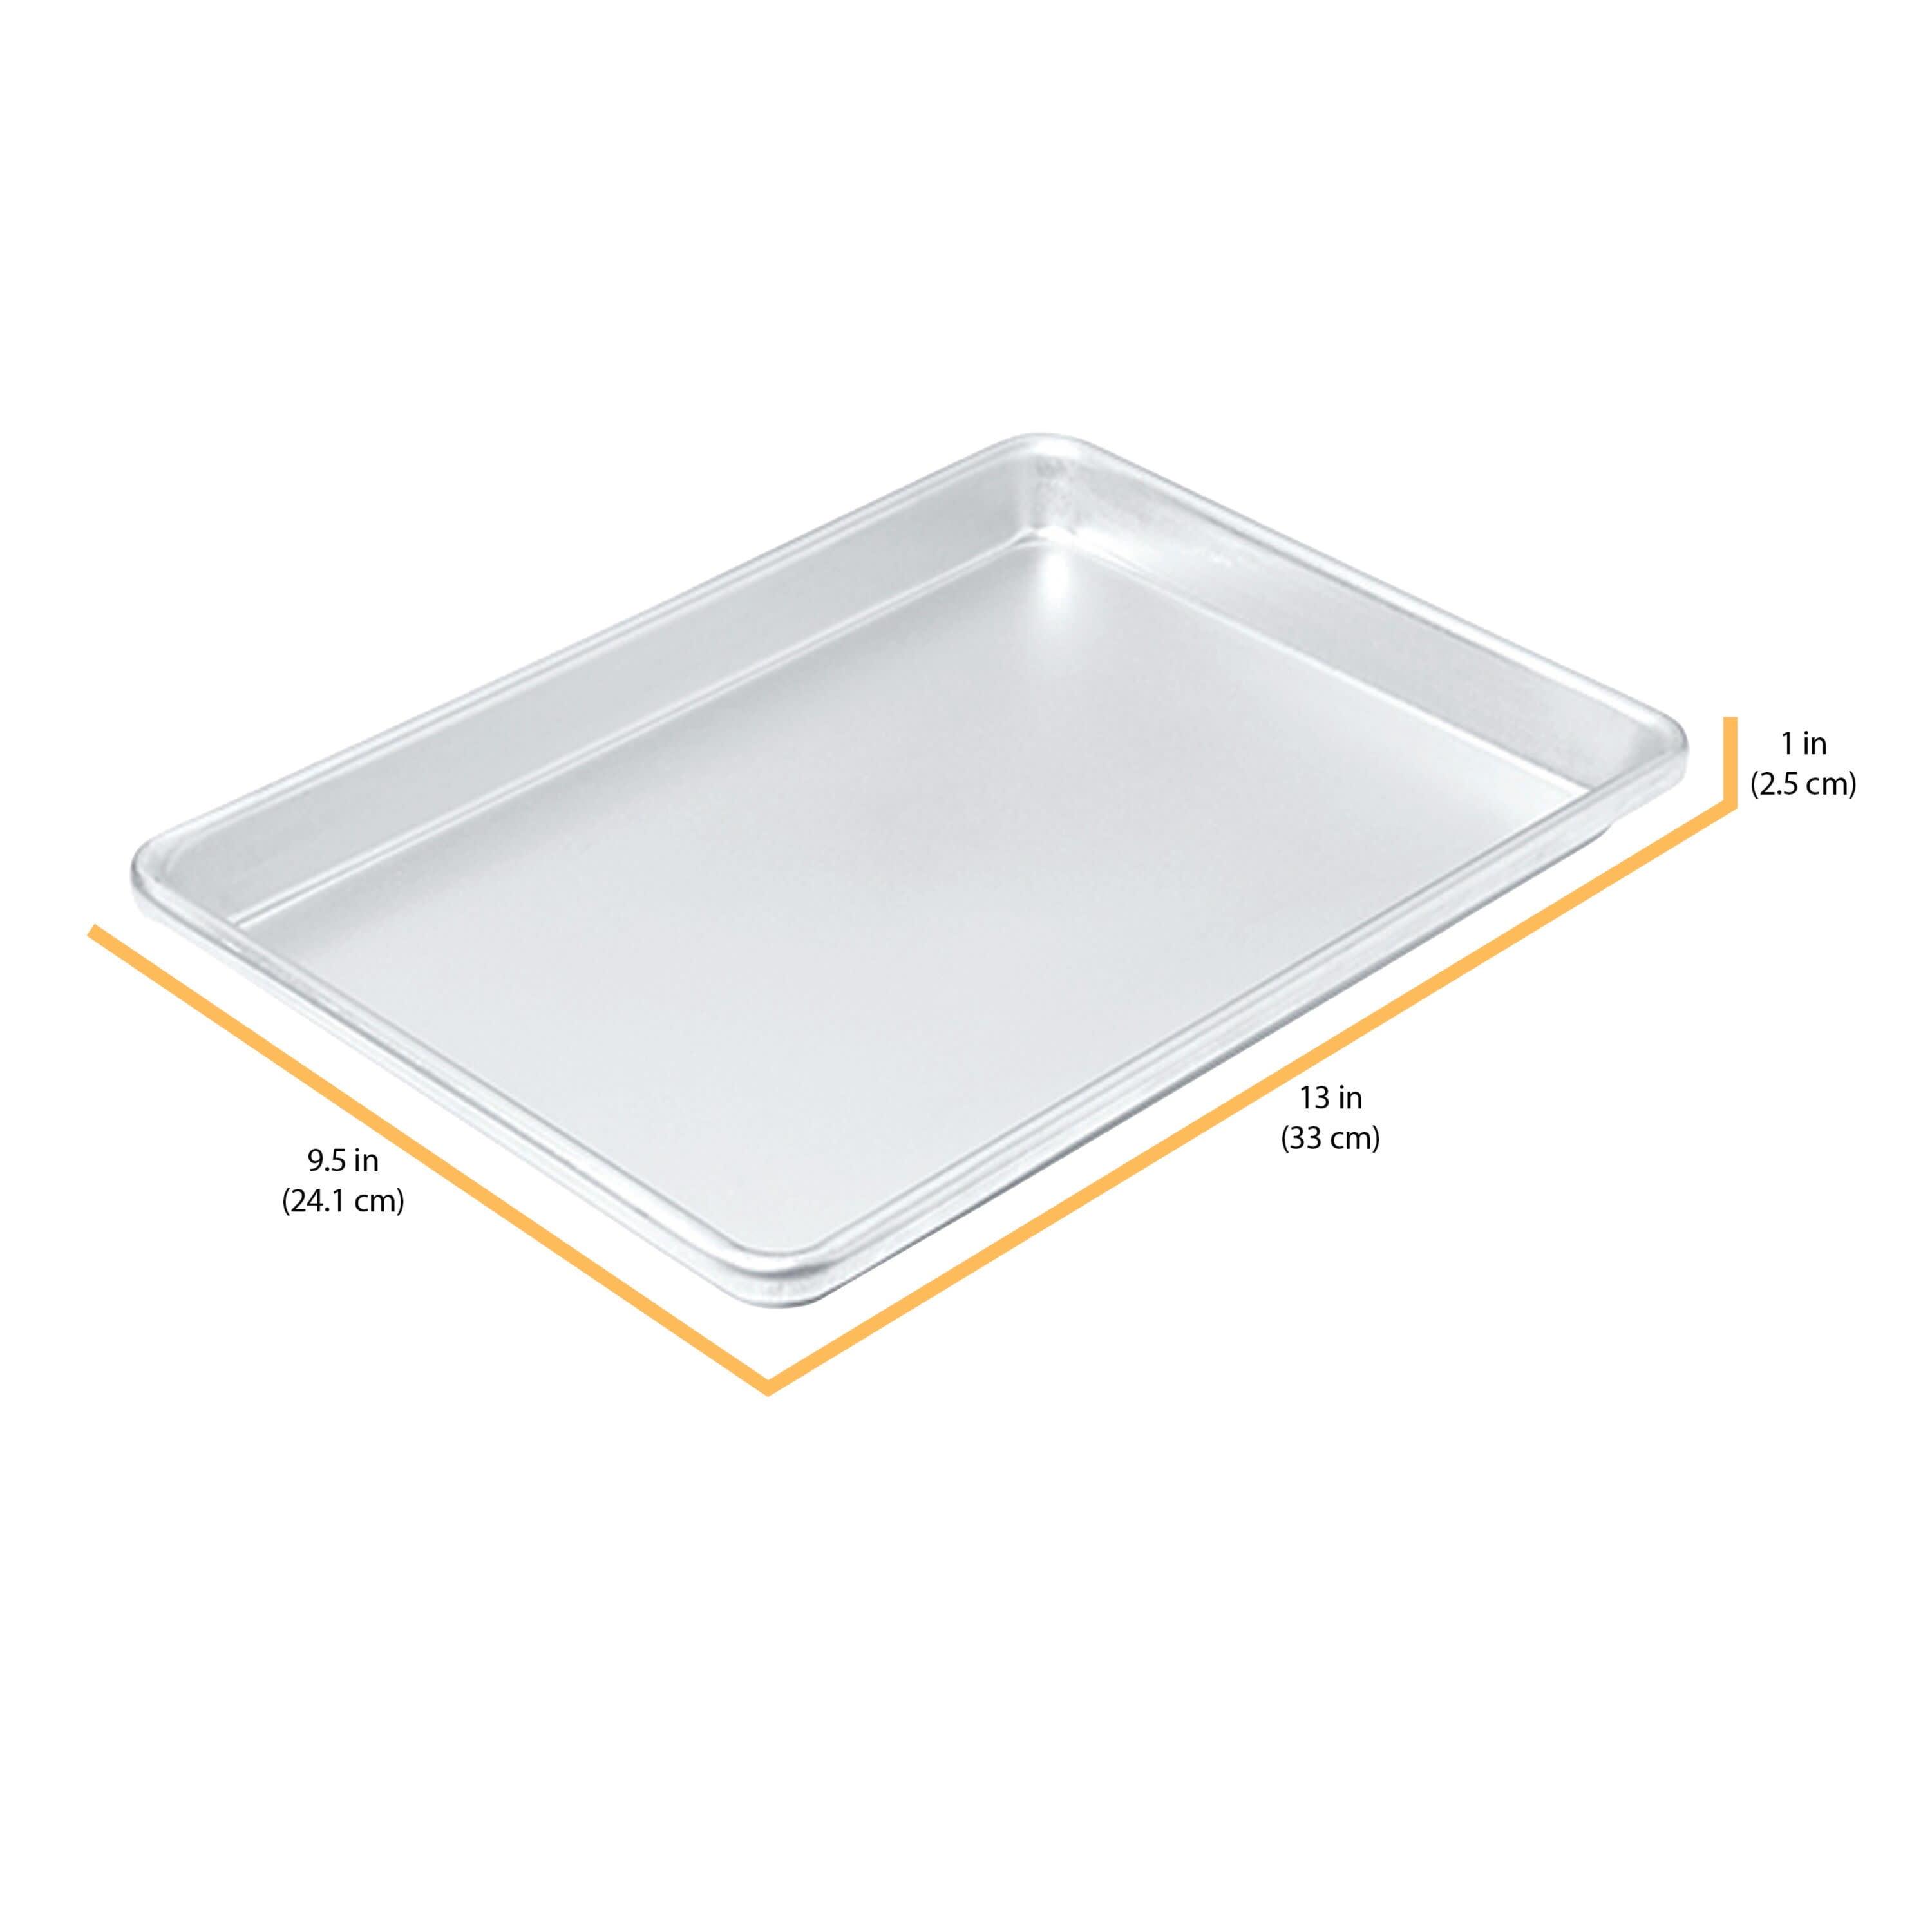 ChicMet Large Jelly Roll Pan - Duluth Kitchen Co